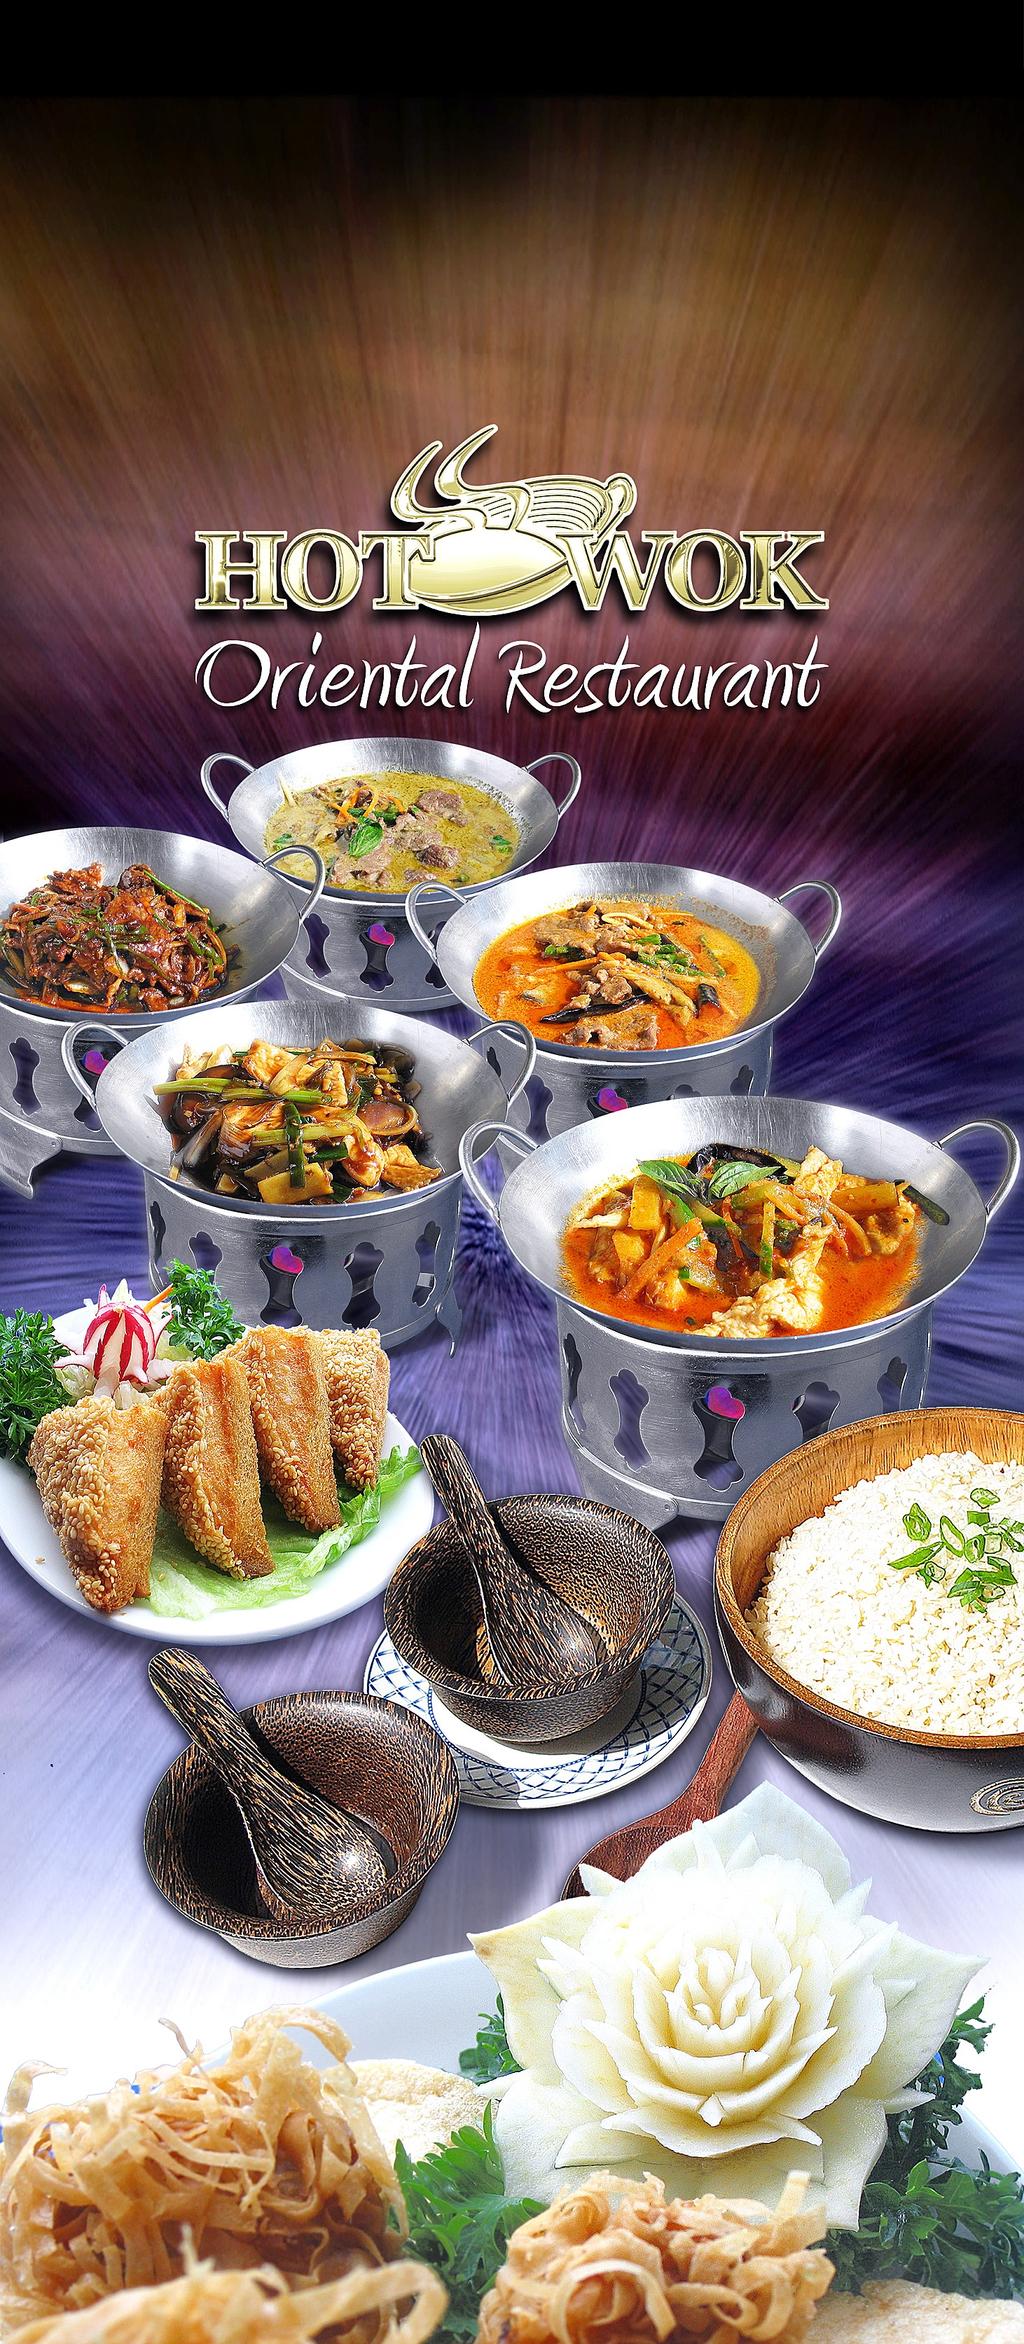 FOREWORD Our Restaurant have been established with spicy, fragrant, light, fresh and tasty food cooking from around South East Asia, including Thailand, Indonesia, Malaysia and Singapore.